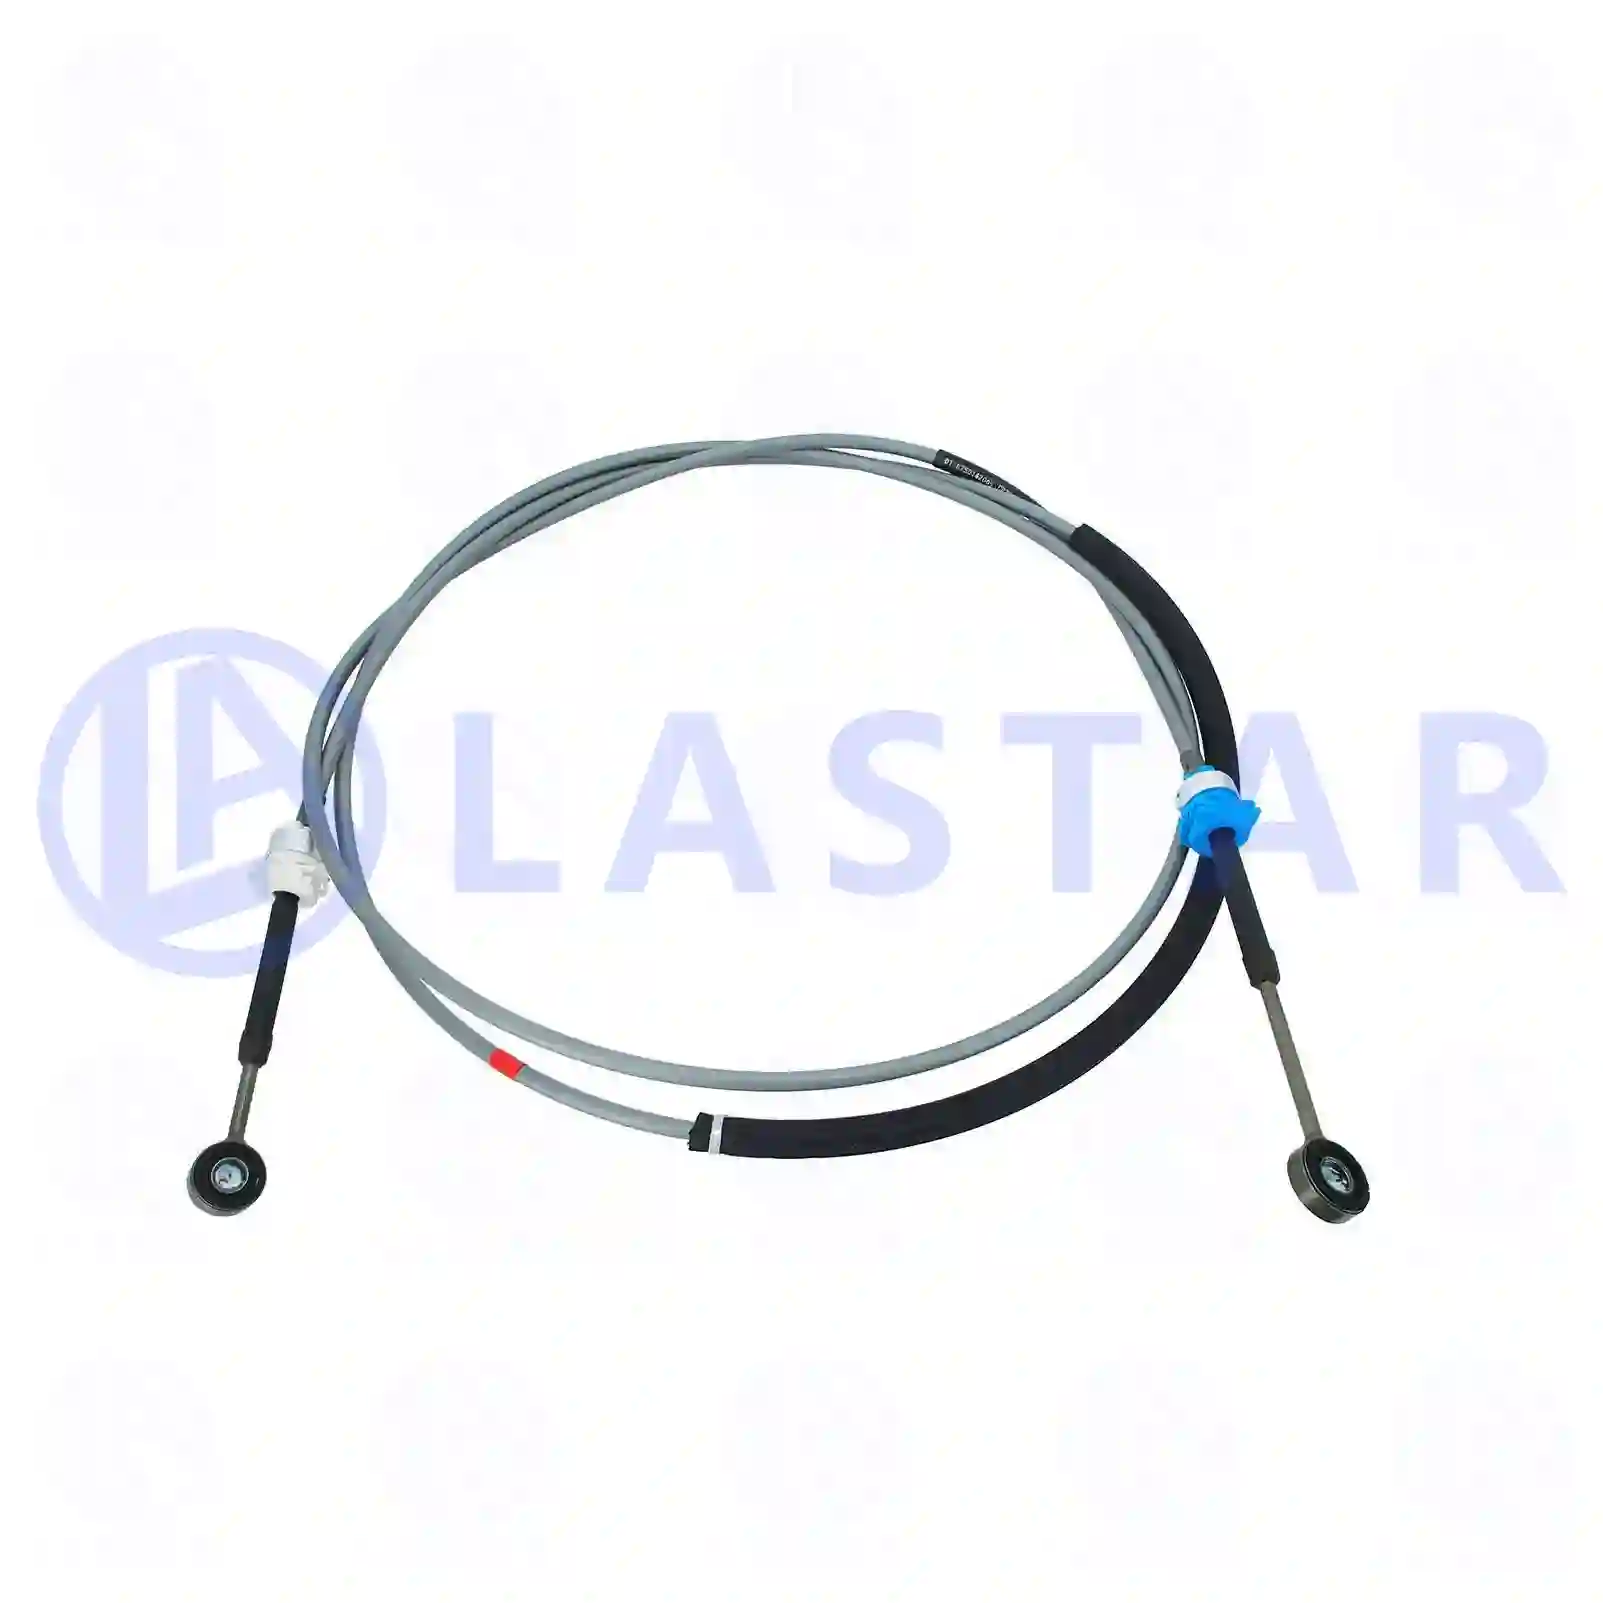 Control cable, switching, 77732695, 21343581, 217897 ||  77732695 Lastar Spare Part | Truck Spare Parts, Auotomotive Spare Parts Control cable, switching, 77732695, 21343581, 217897 ||  77732695 Lastar Spare Part | Truck Spare Parts, Auotomotive Spare Parts